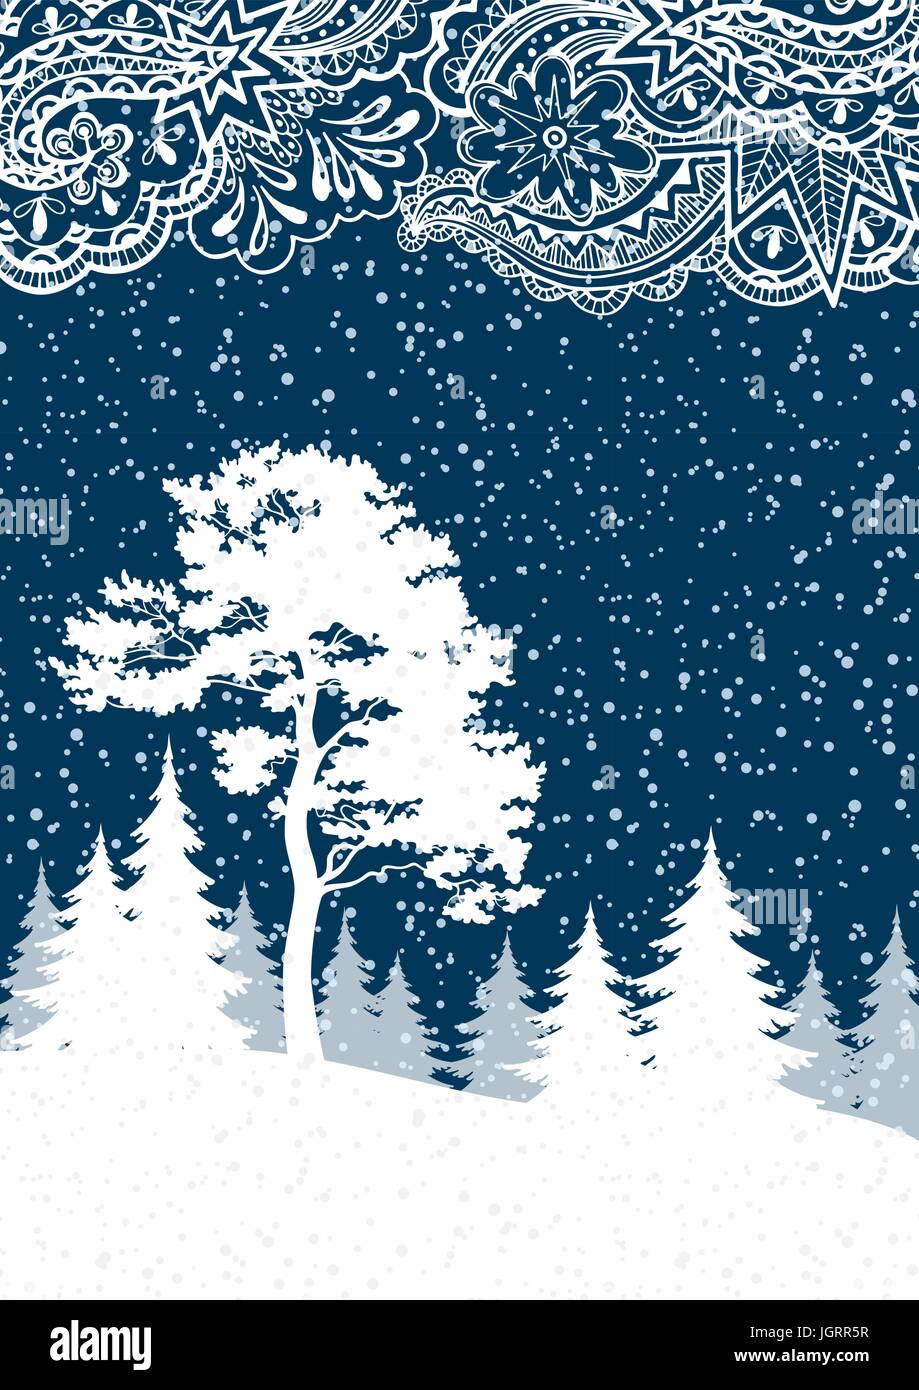 Christmas Winter Forest Landscape Stock Vector